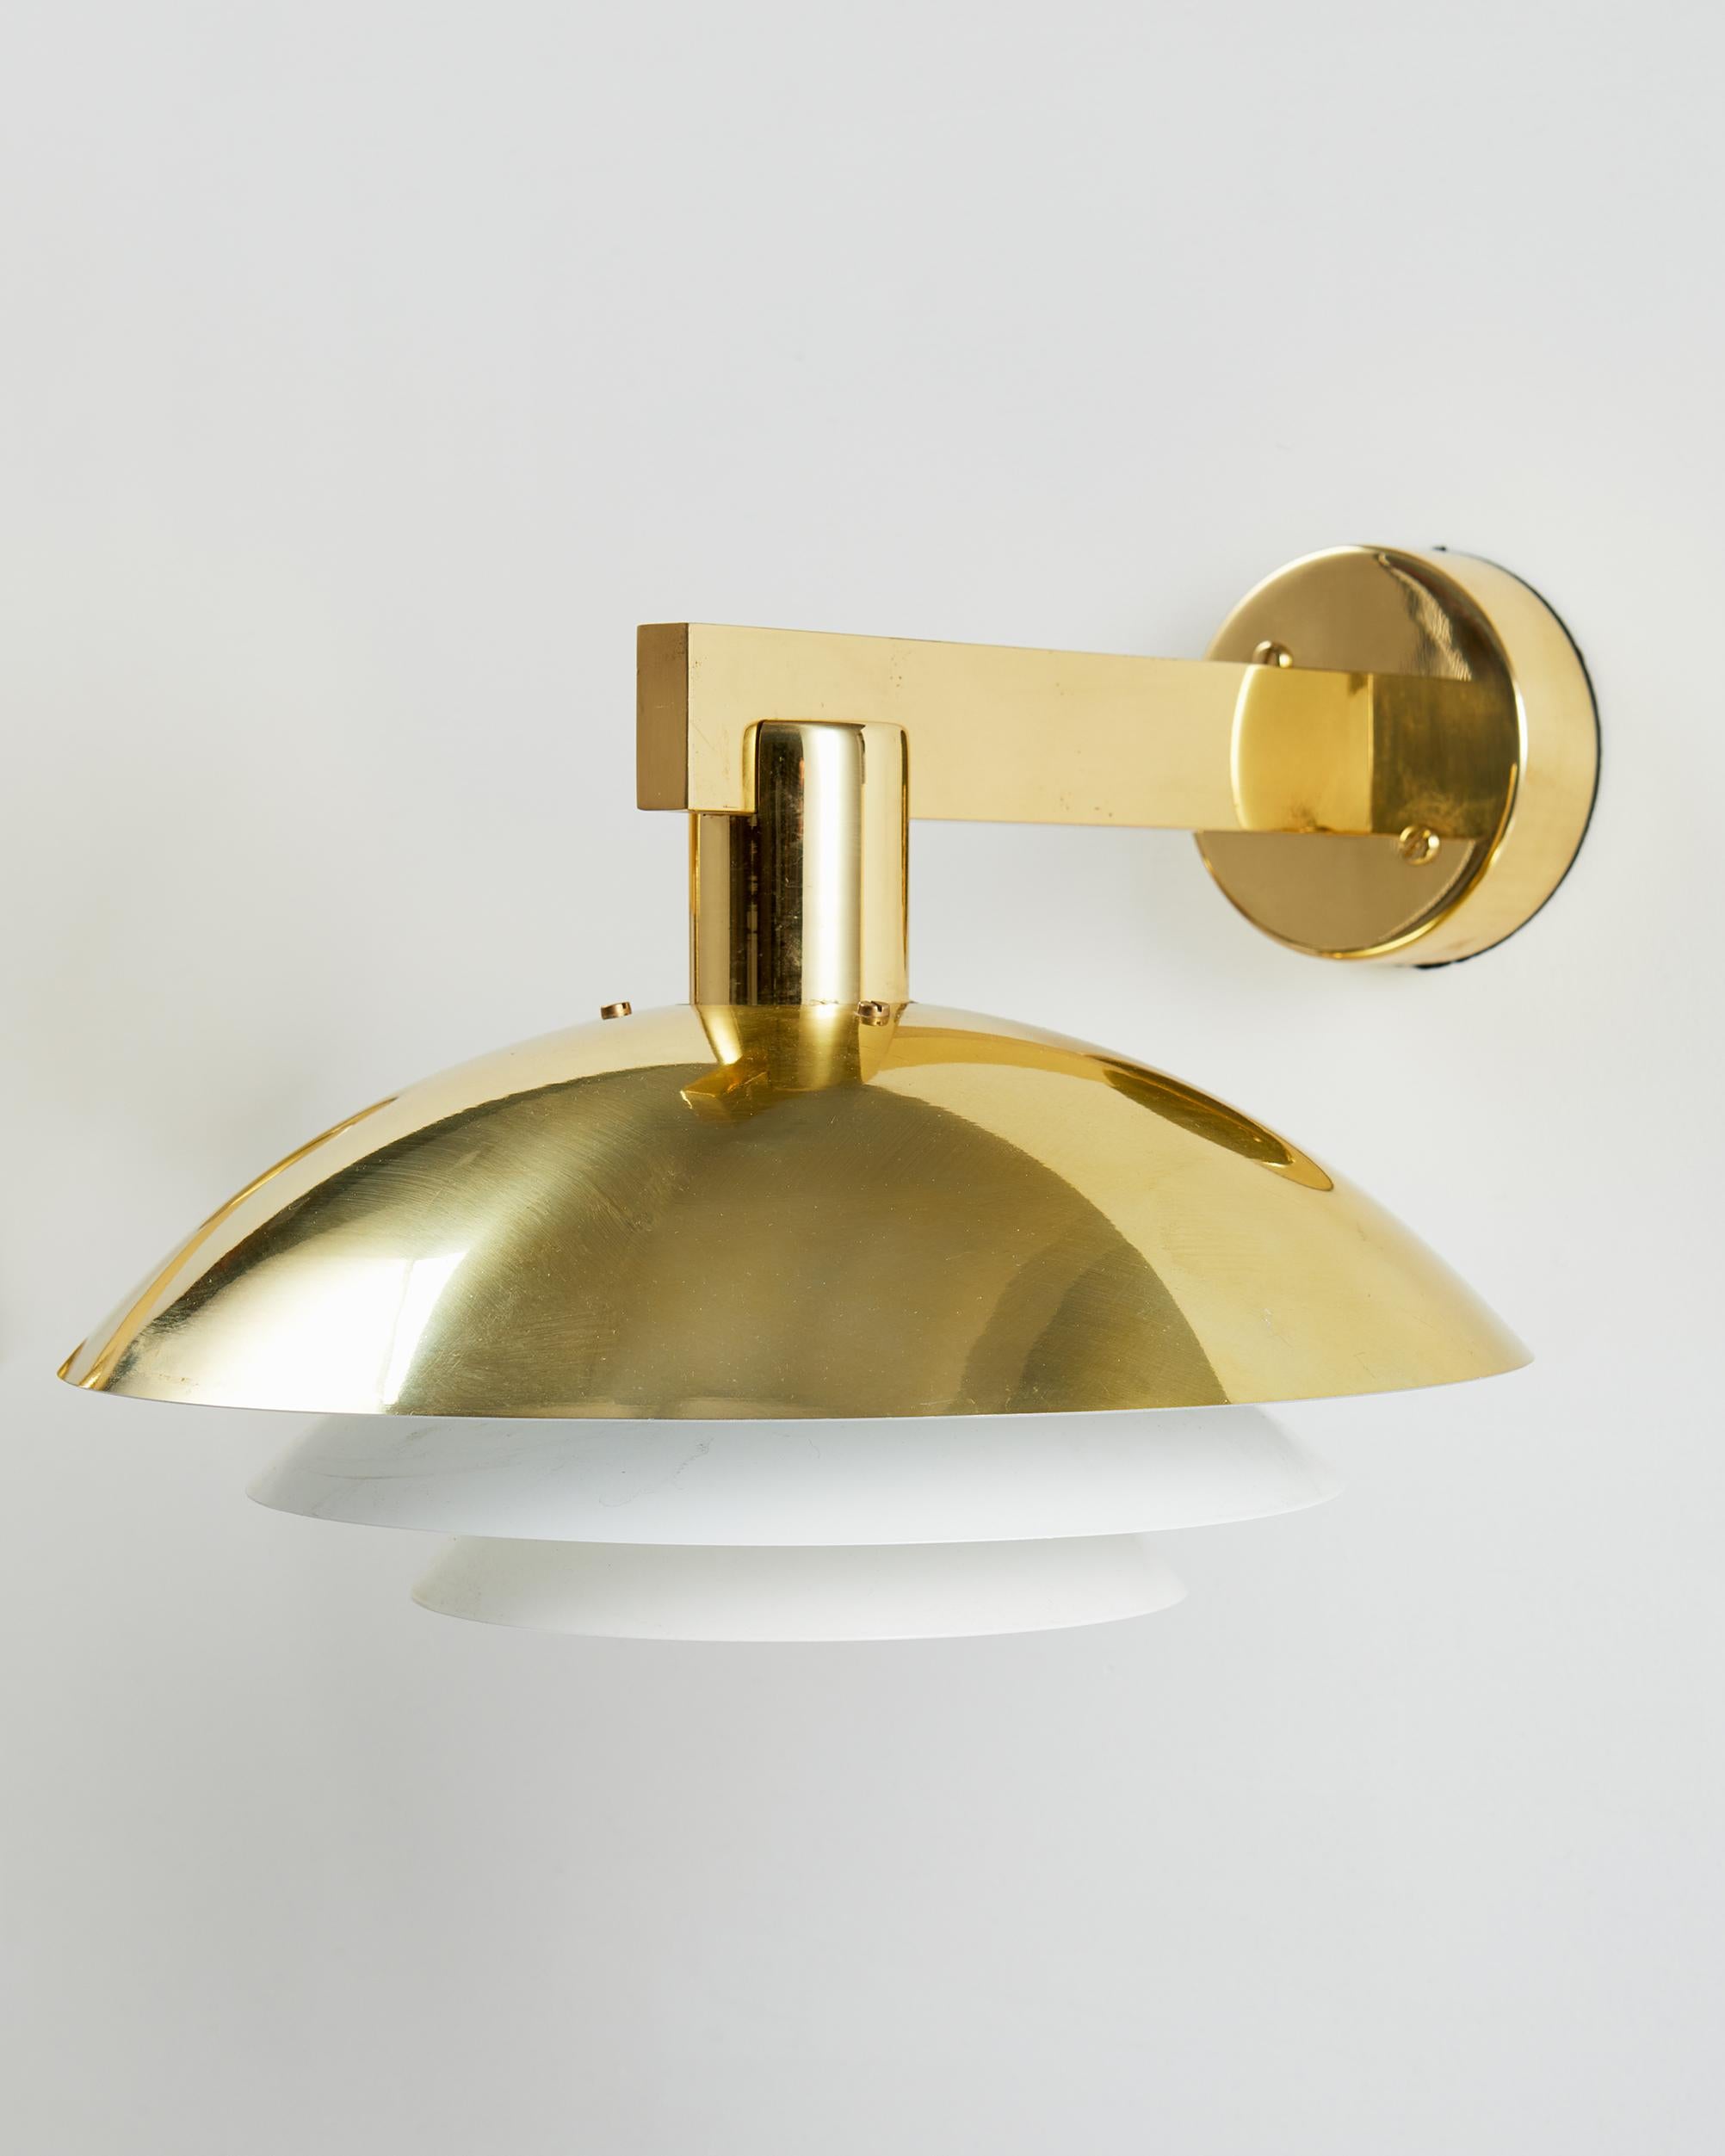 20th Century Pair of Wall Lights Designed by Hans-Agne Jakobsson, Sweden, 1960s For Sale